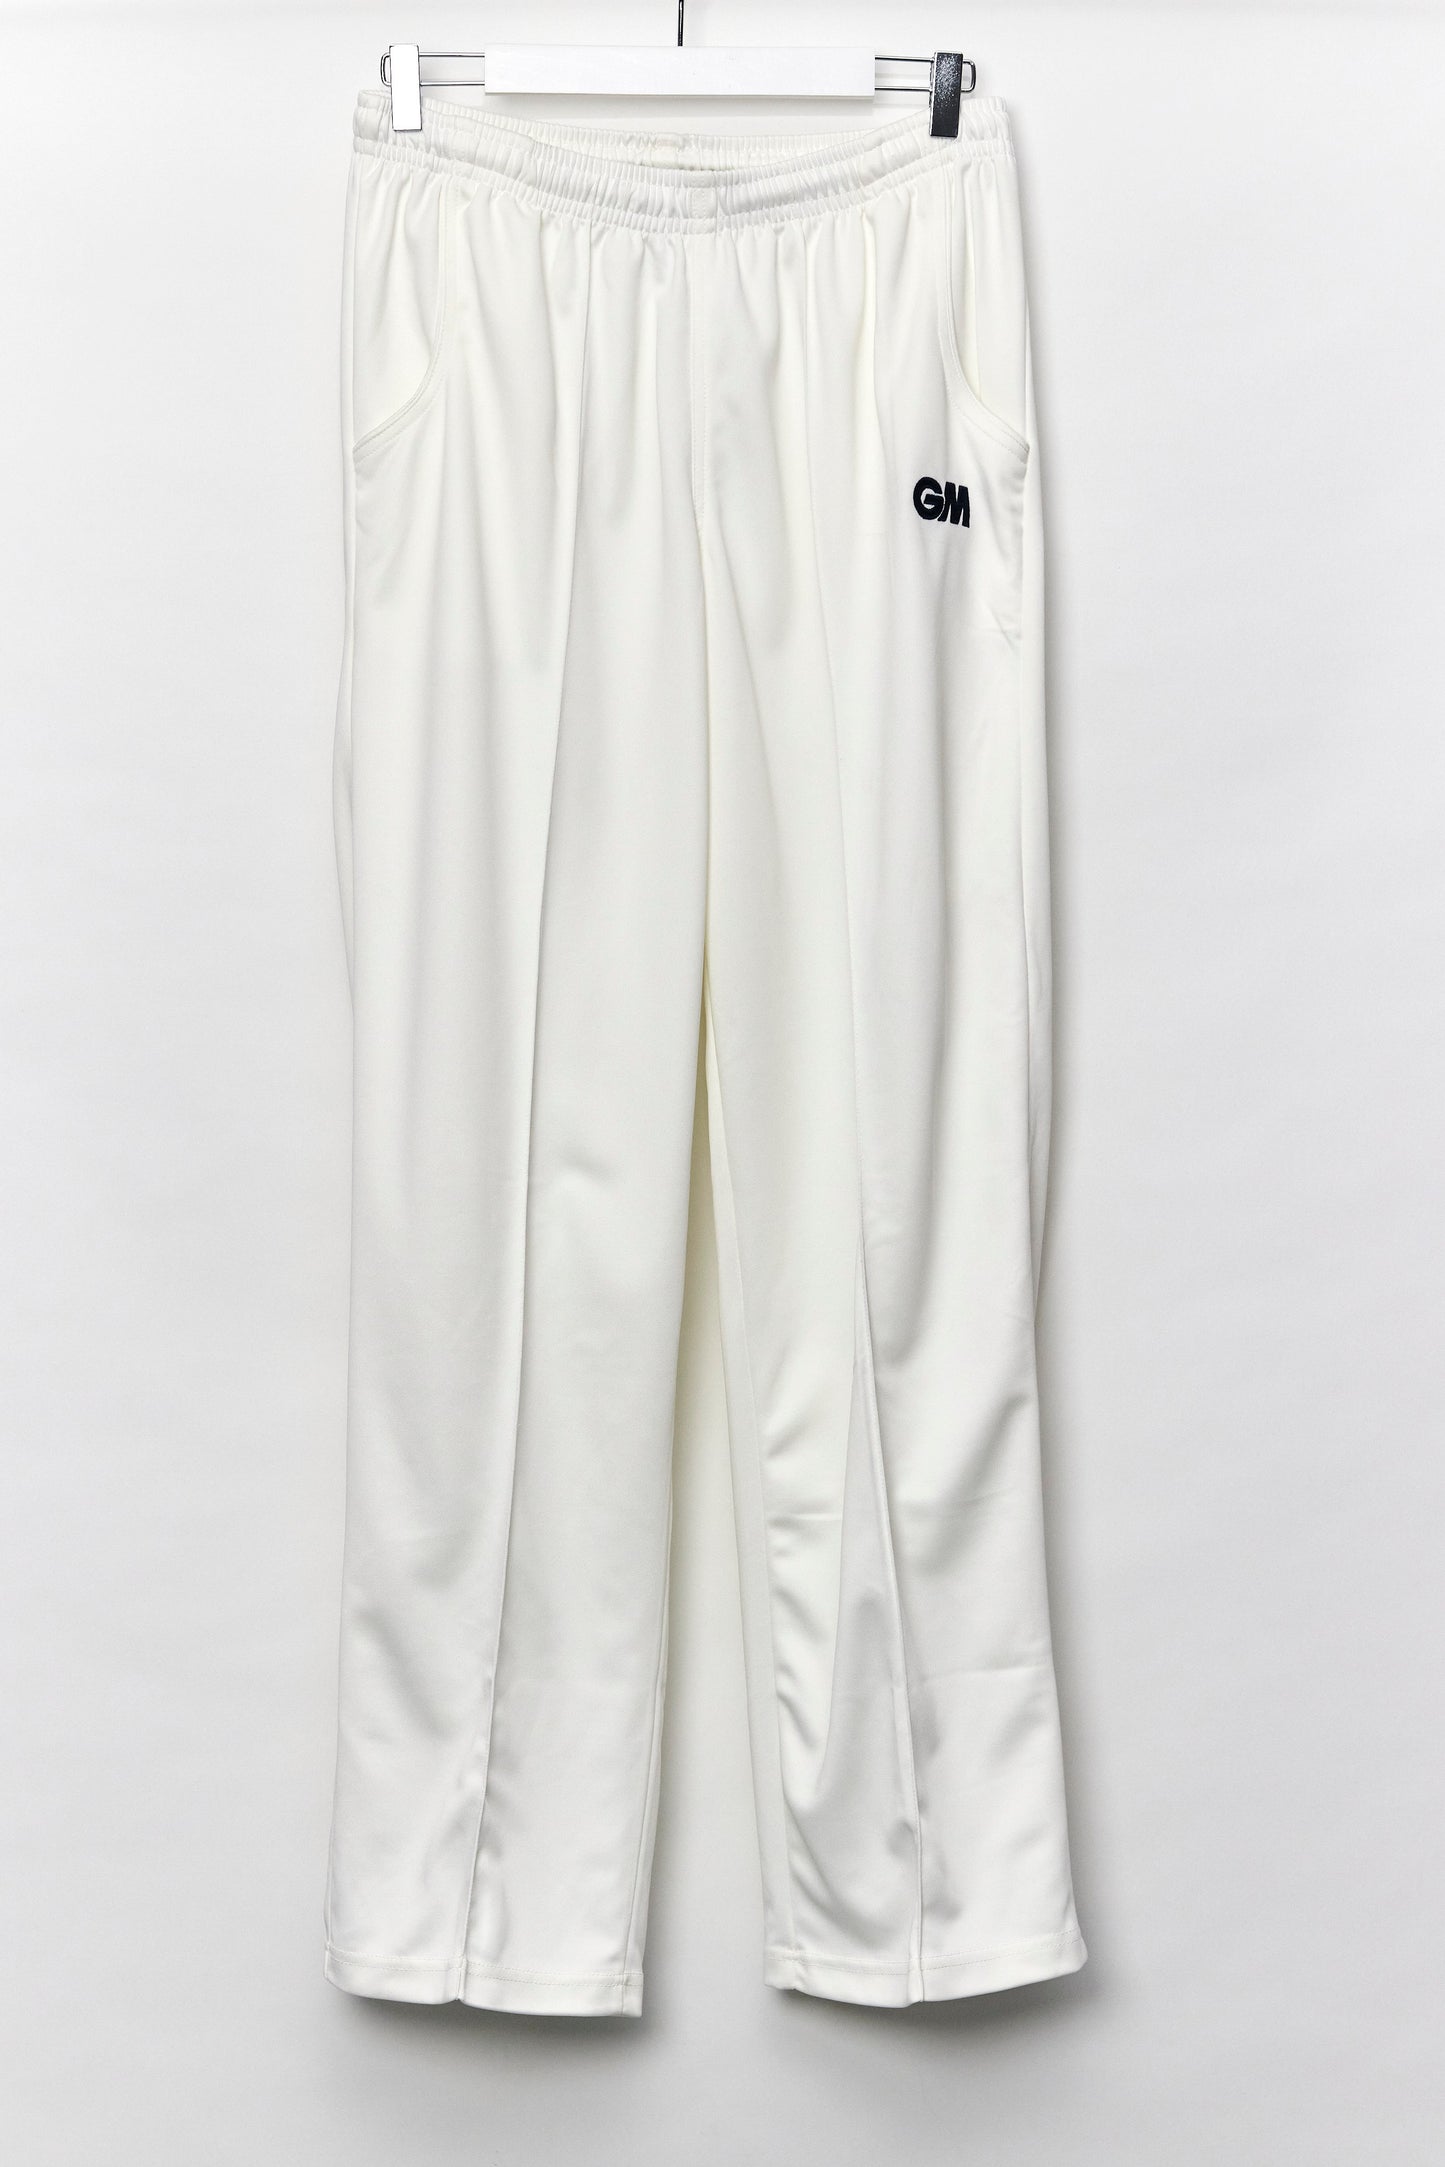 Mens Cricket Trousers Size Large